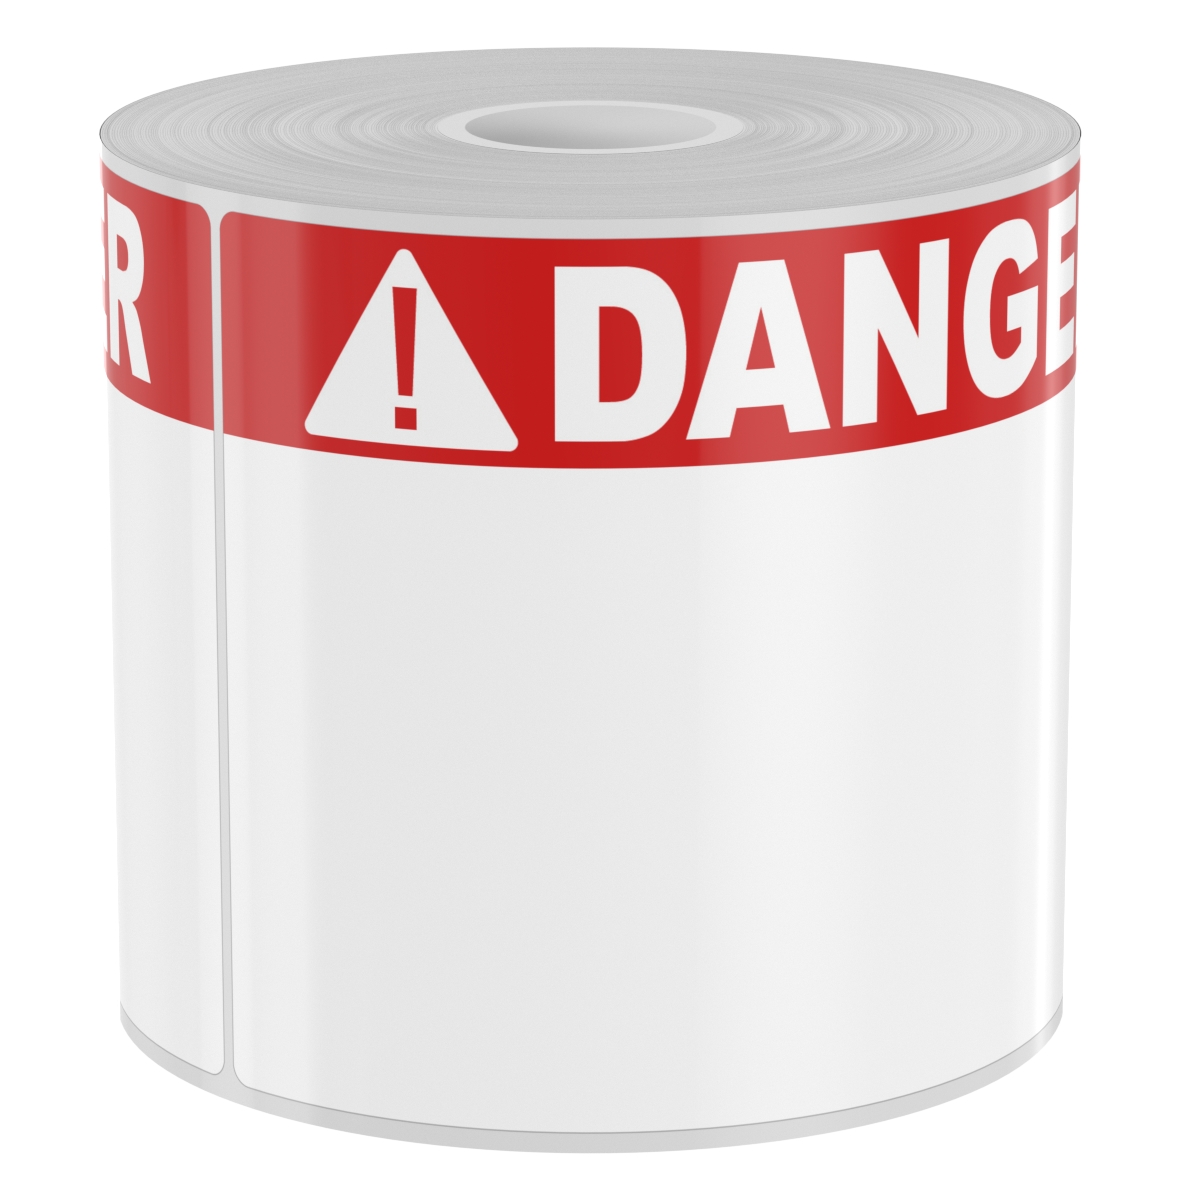 Ask a question about 250 4" x 6" High-Performance Arc Flash labels White Danger on Red Band